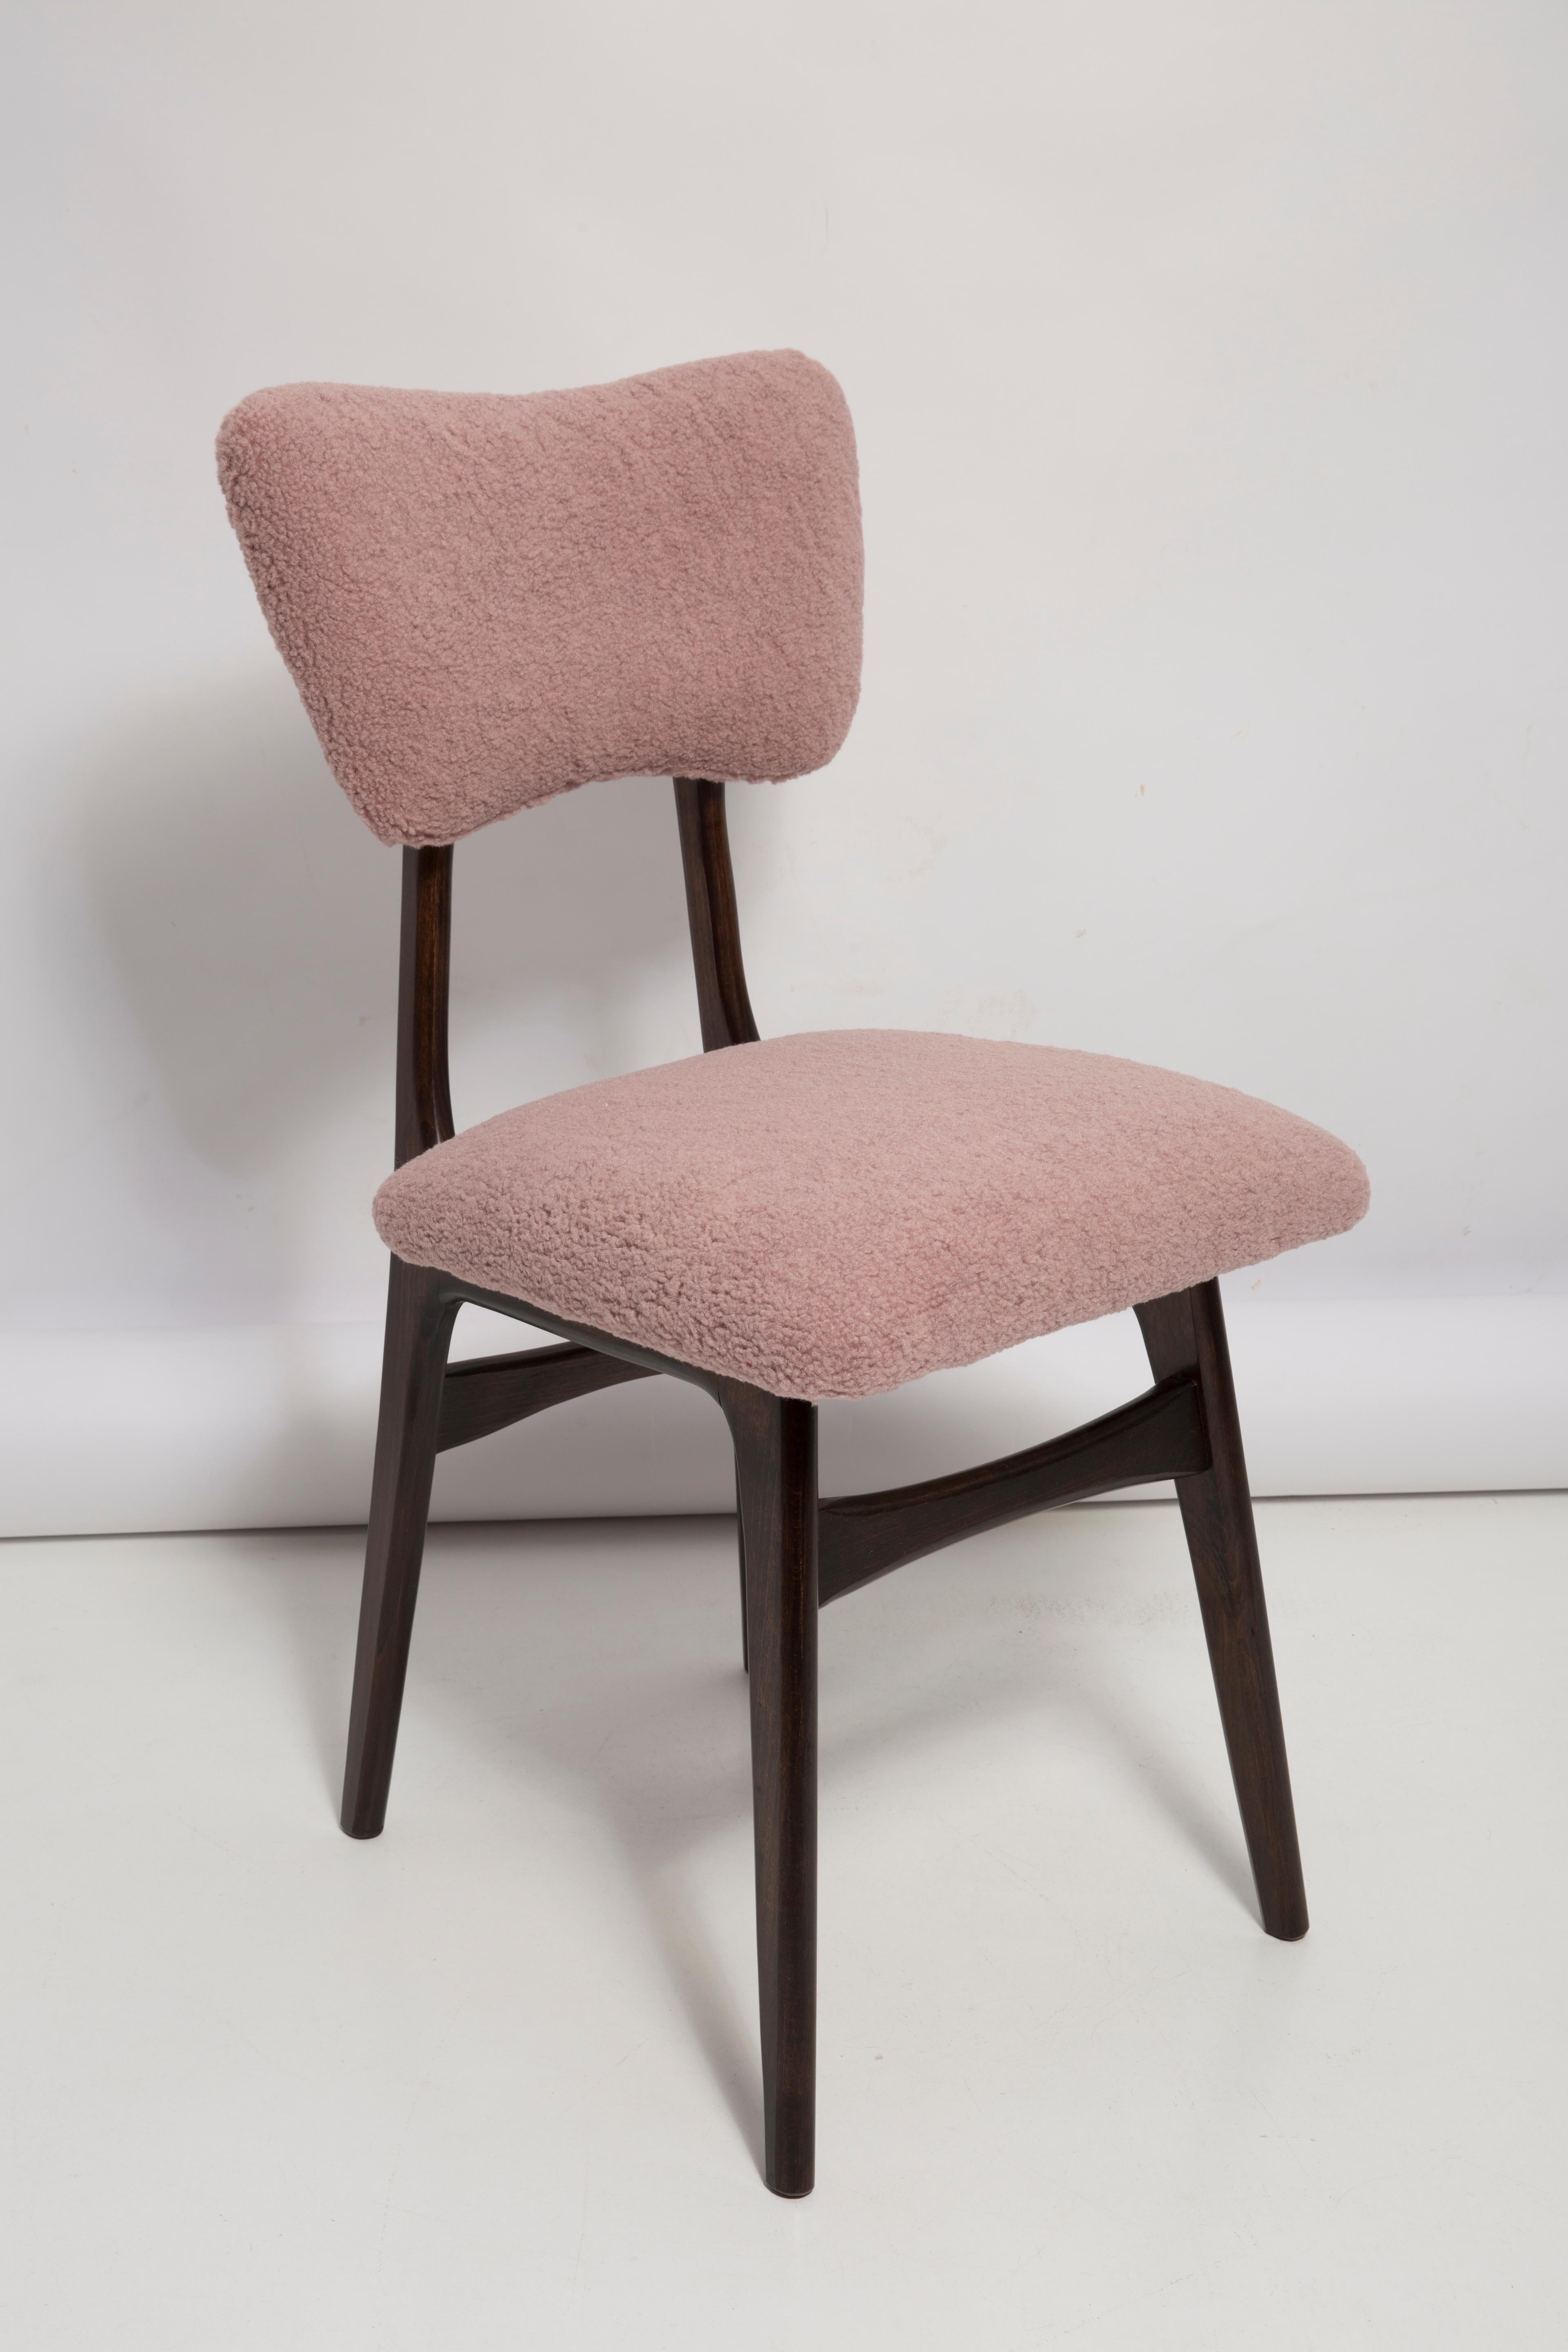 20th Century Mid Century Butterfly Dining Chair, Pink Boucle and Walnut Wood, Poland, 1960s For Sale